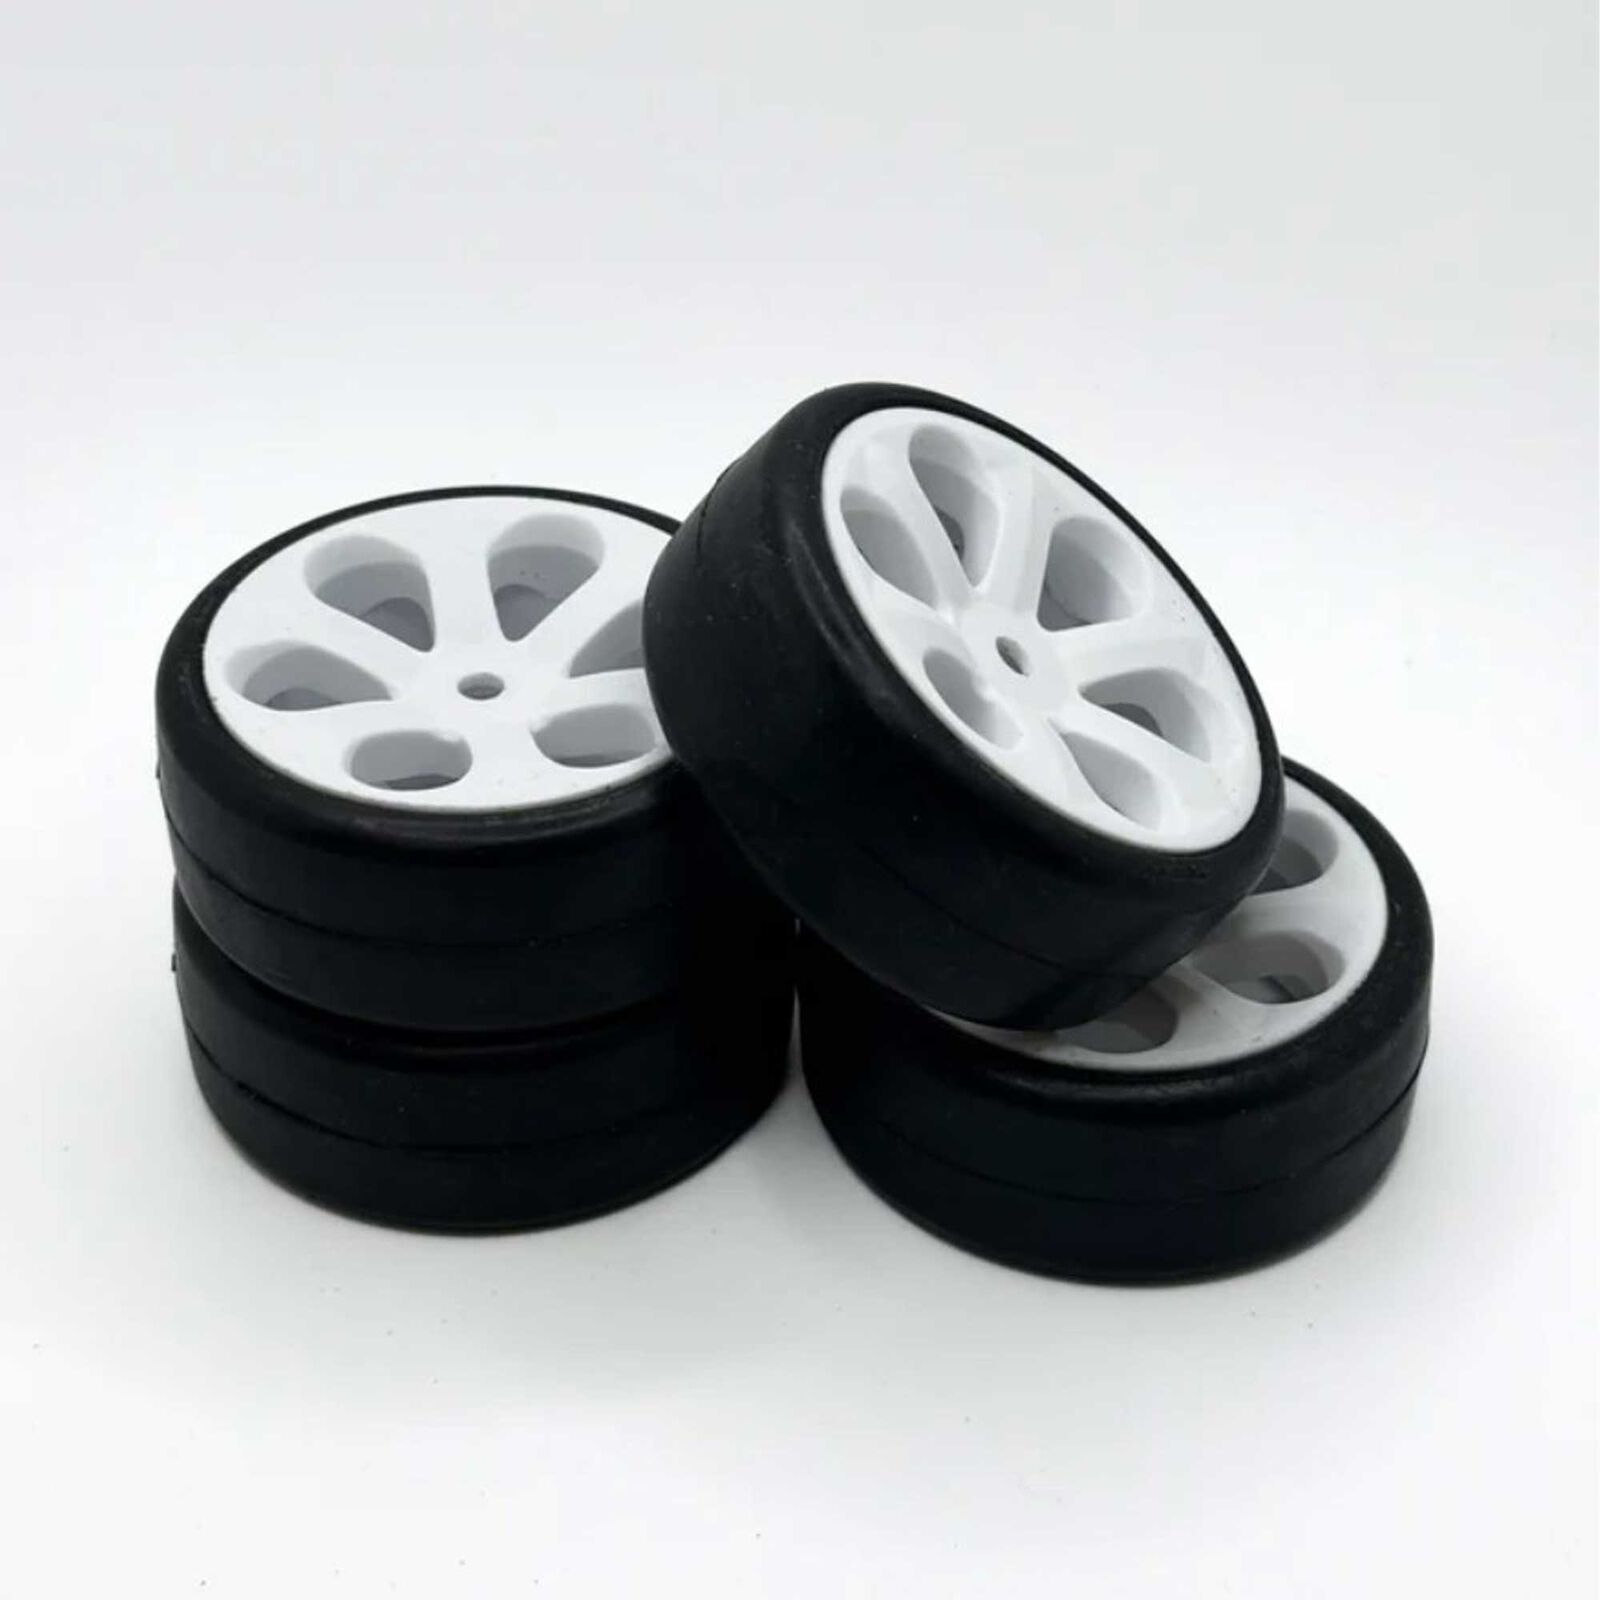 Blue 32 Touring Car Pre-Mounted Tire (4)